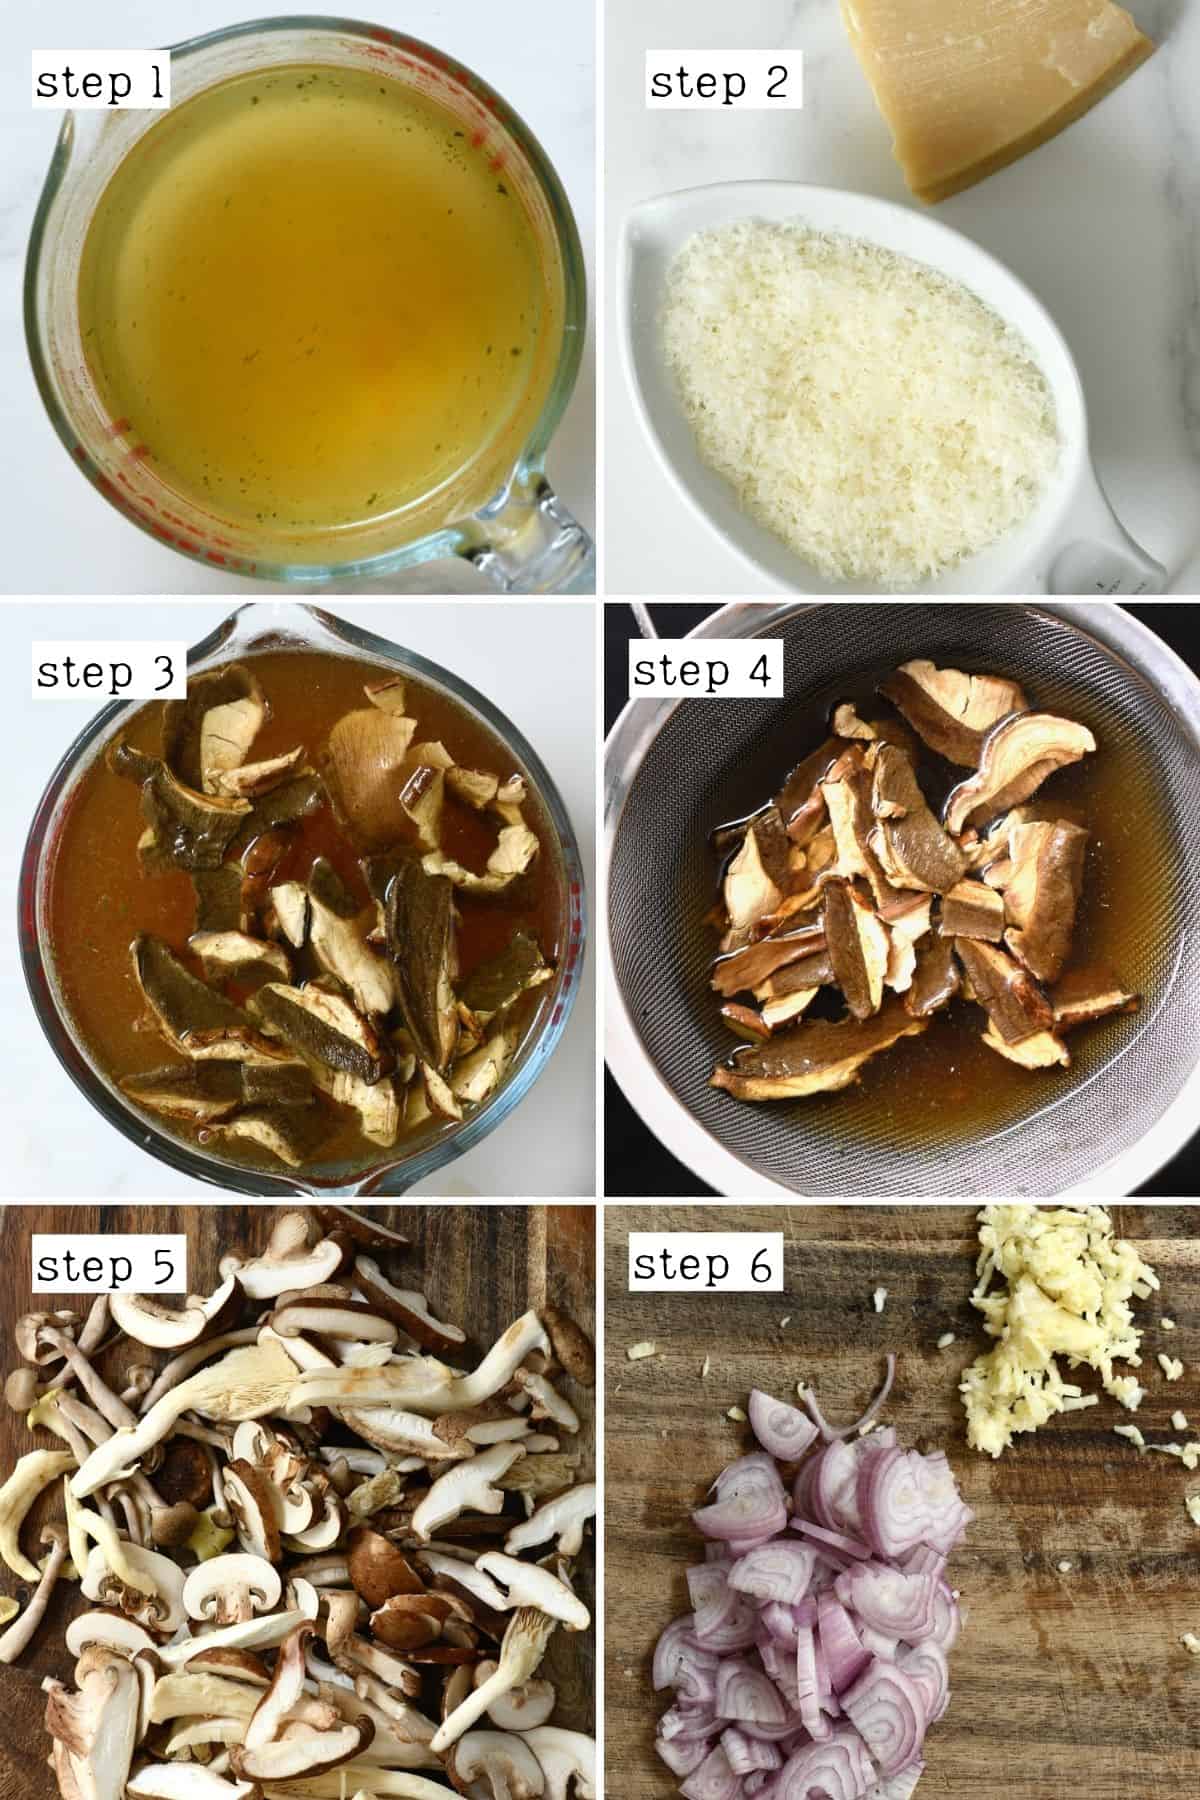 Steps for preparing ingredients for mushroom risotto